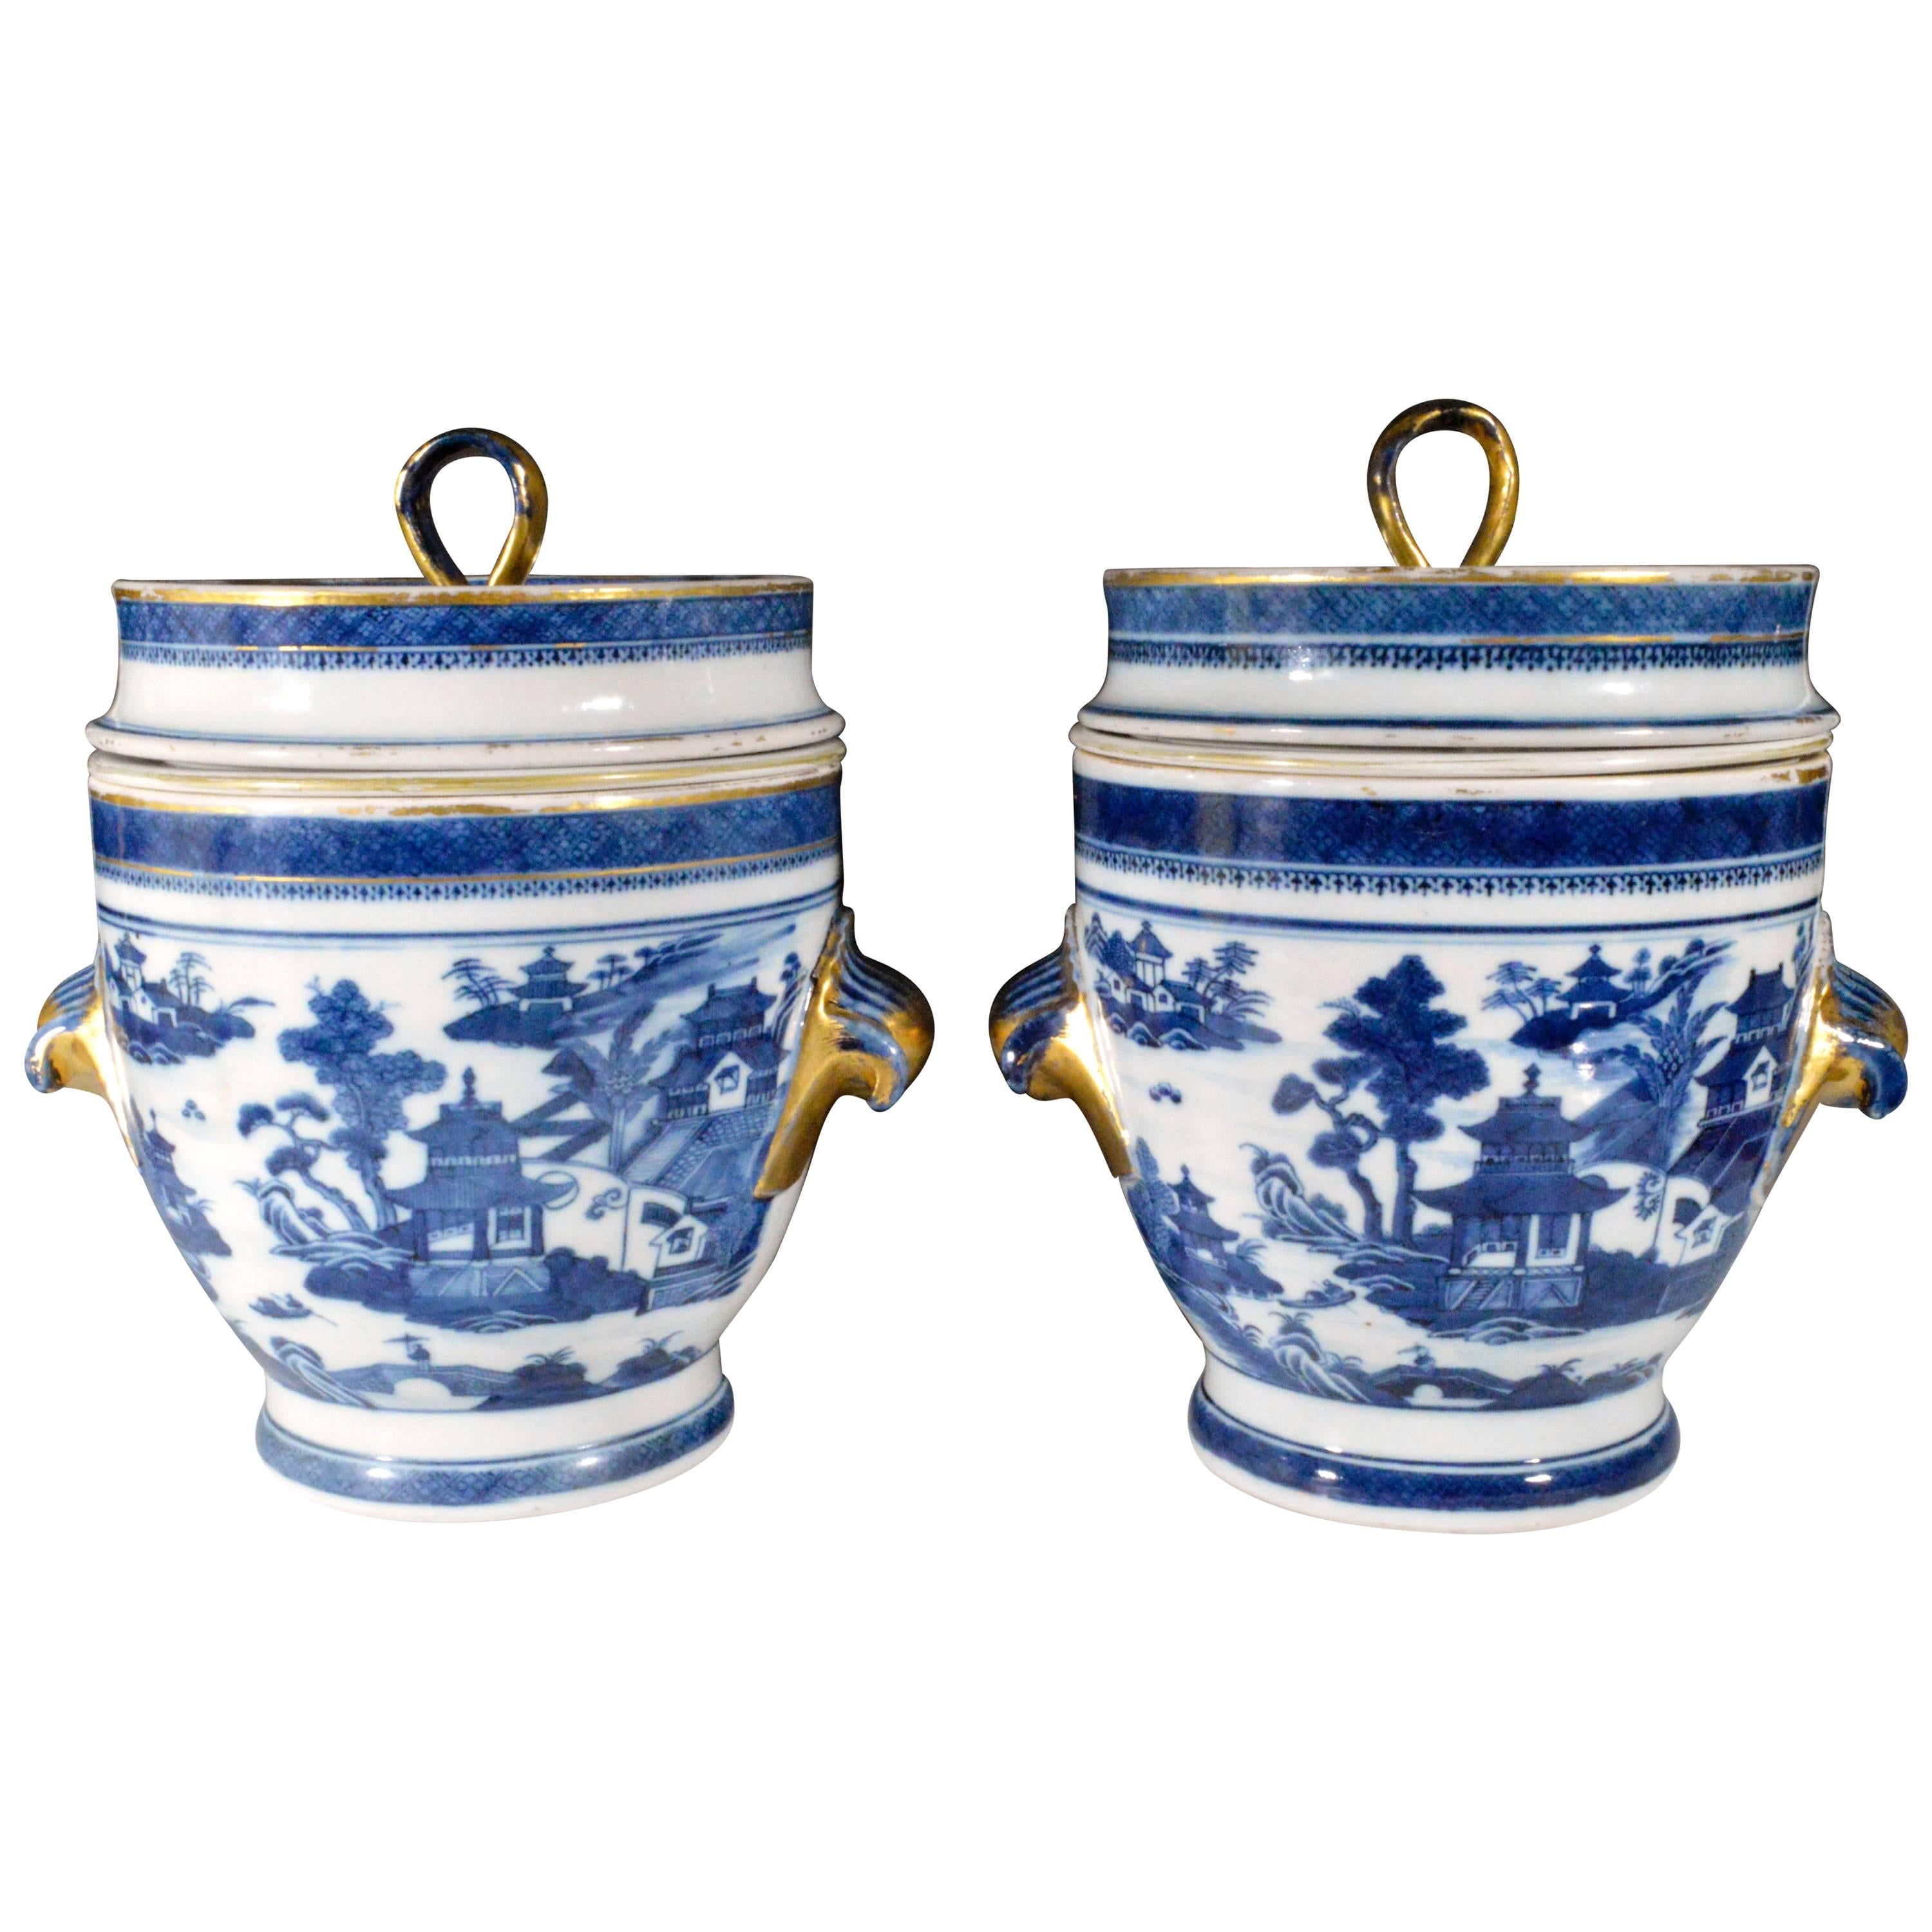 Chinese Blue and White Fruit Coolers, Liners and Covers, circa 1790-1810